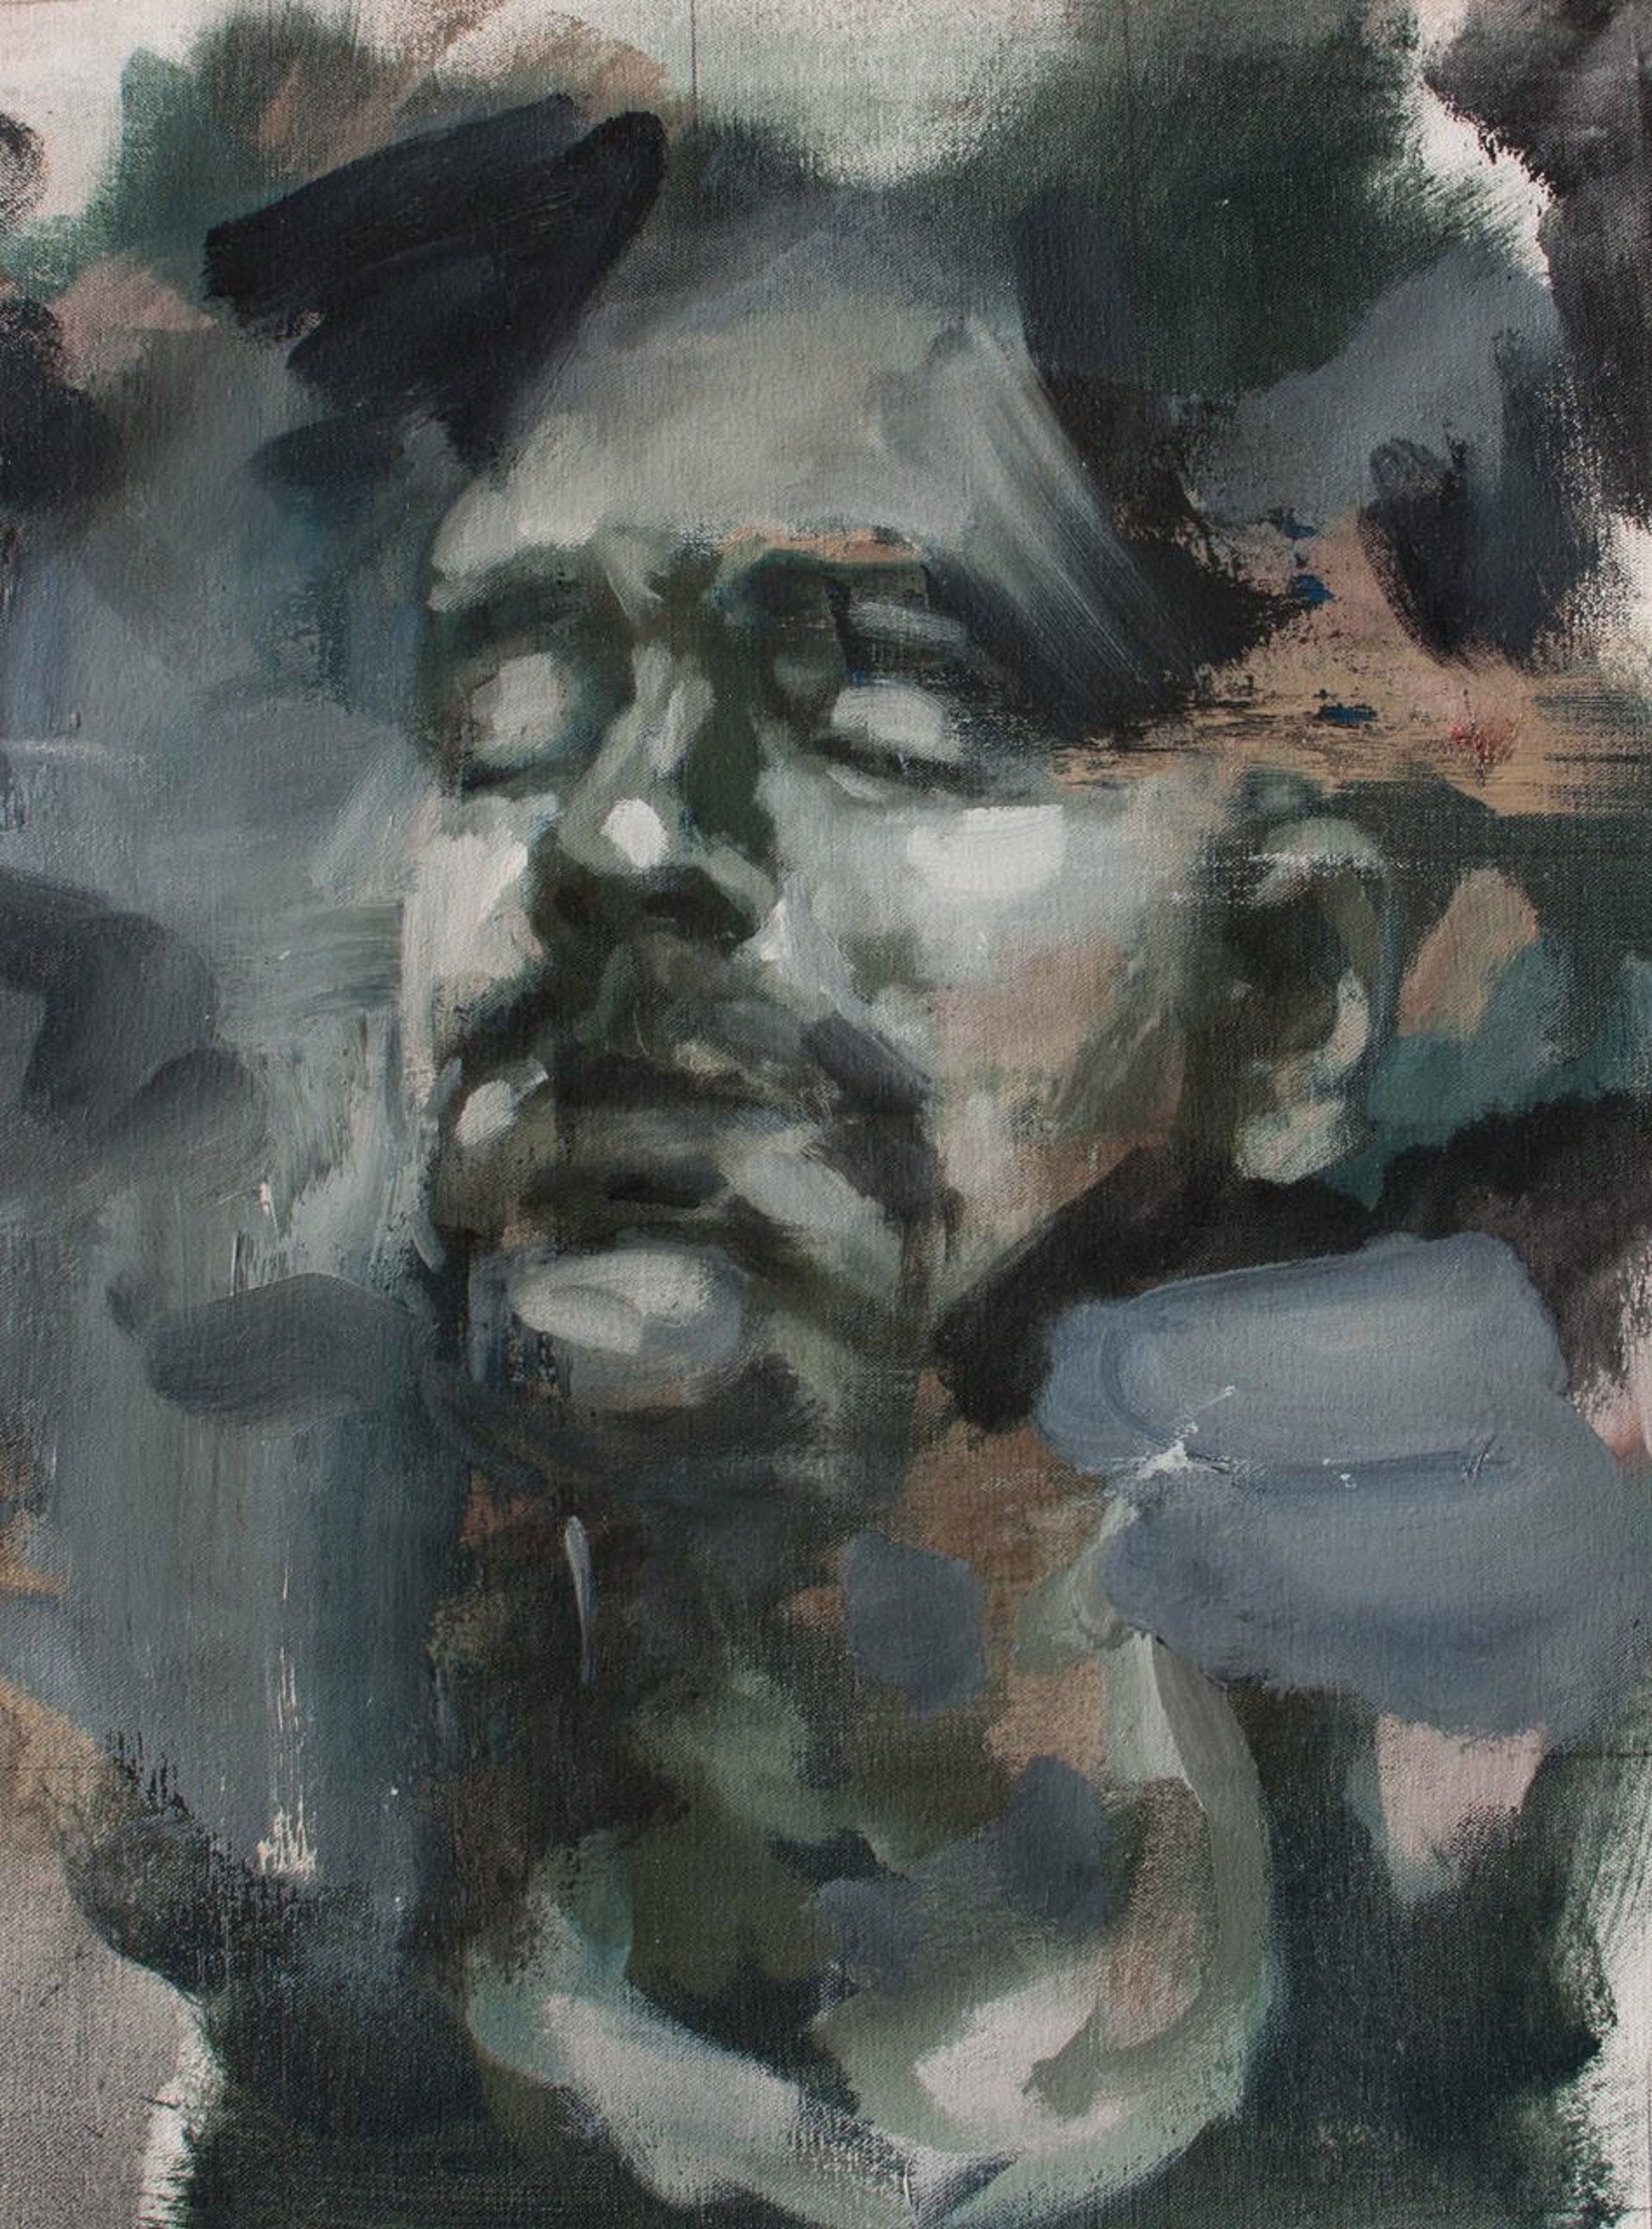 Untitled Portrait Abstraction 4 by Andrew Moncrief